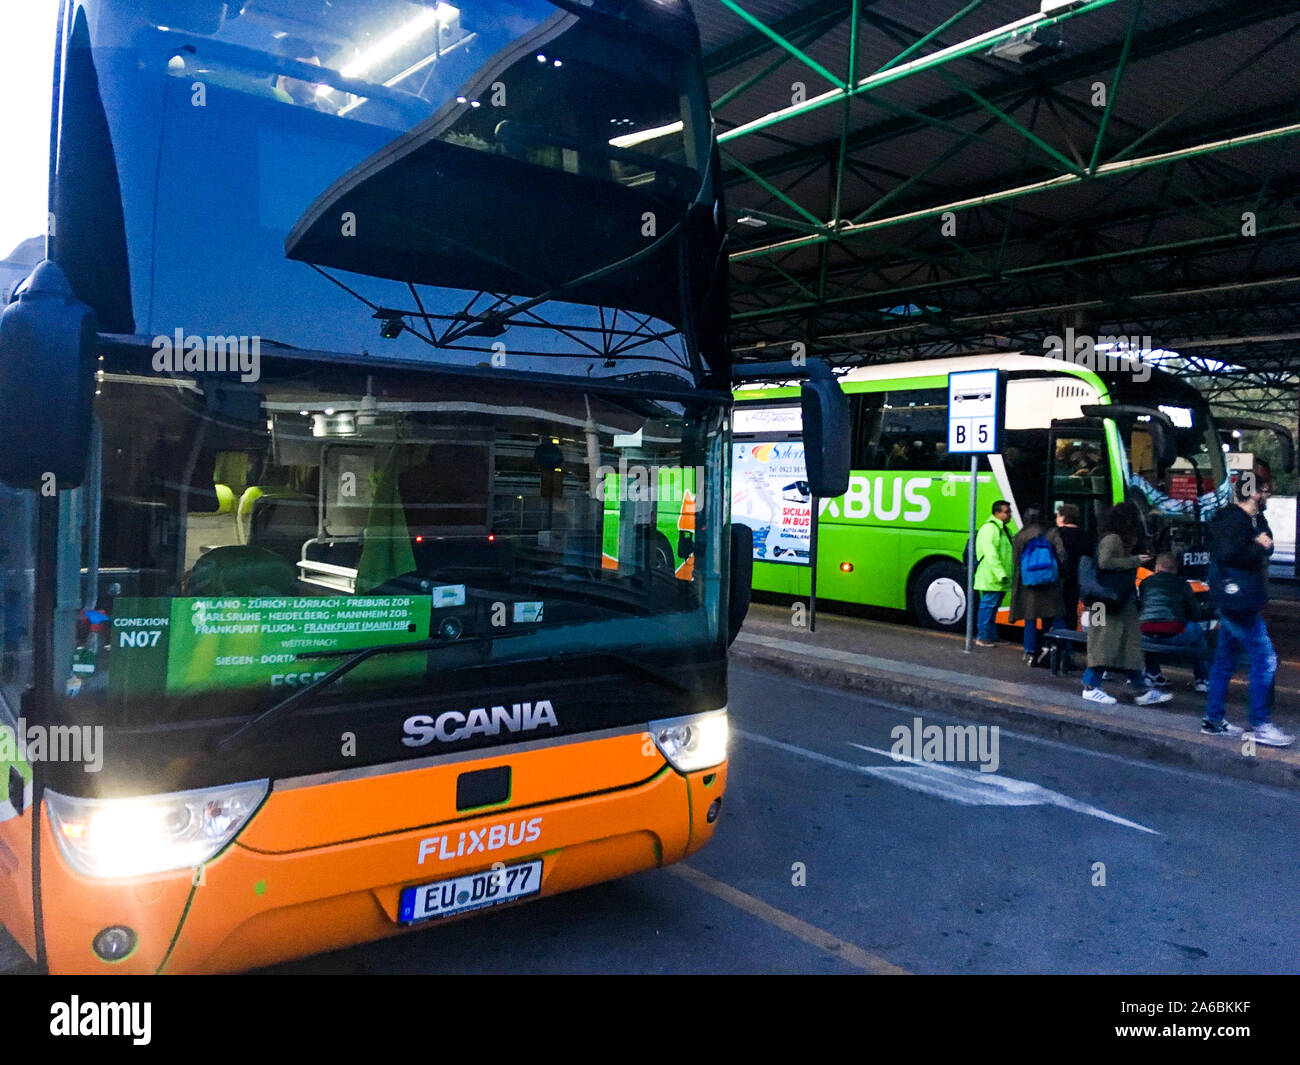 Italian Flixbus High Resolution Stock Photography and Images - Alamy